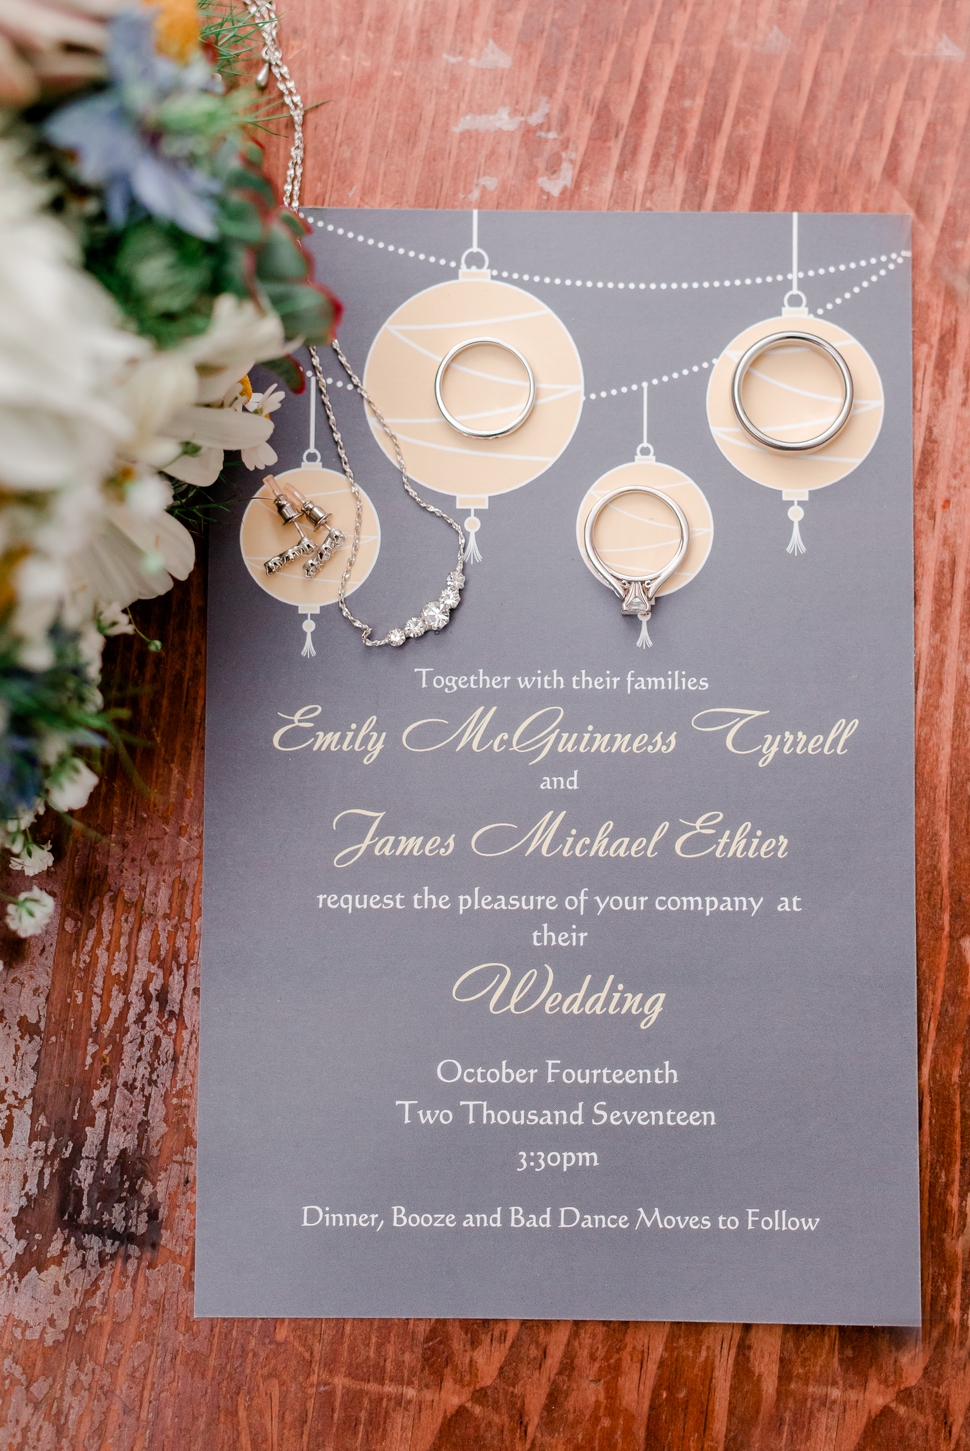 contemporary styled wedding invite in grey and pale yellow shown next to wildflower bouquet